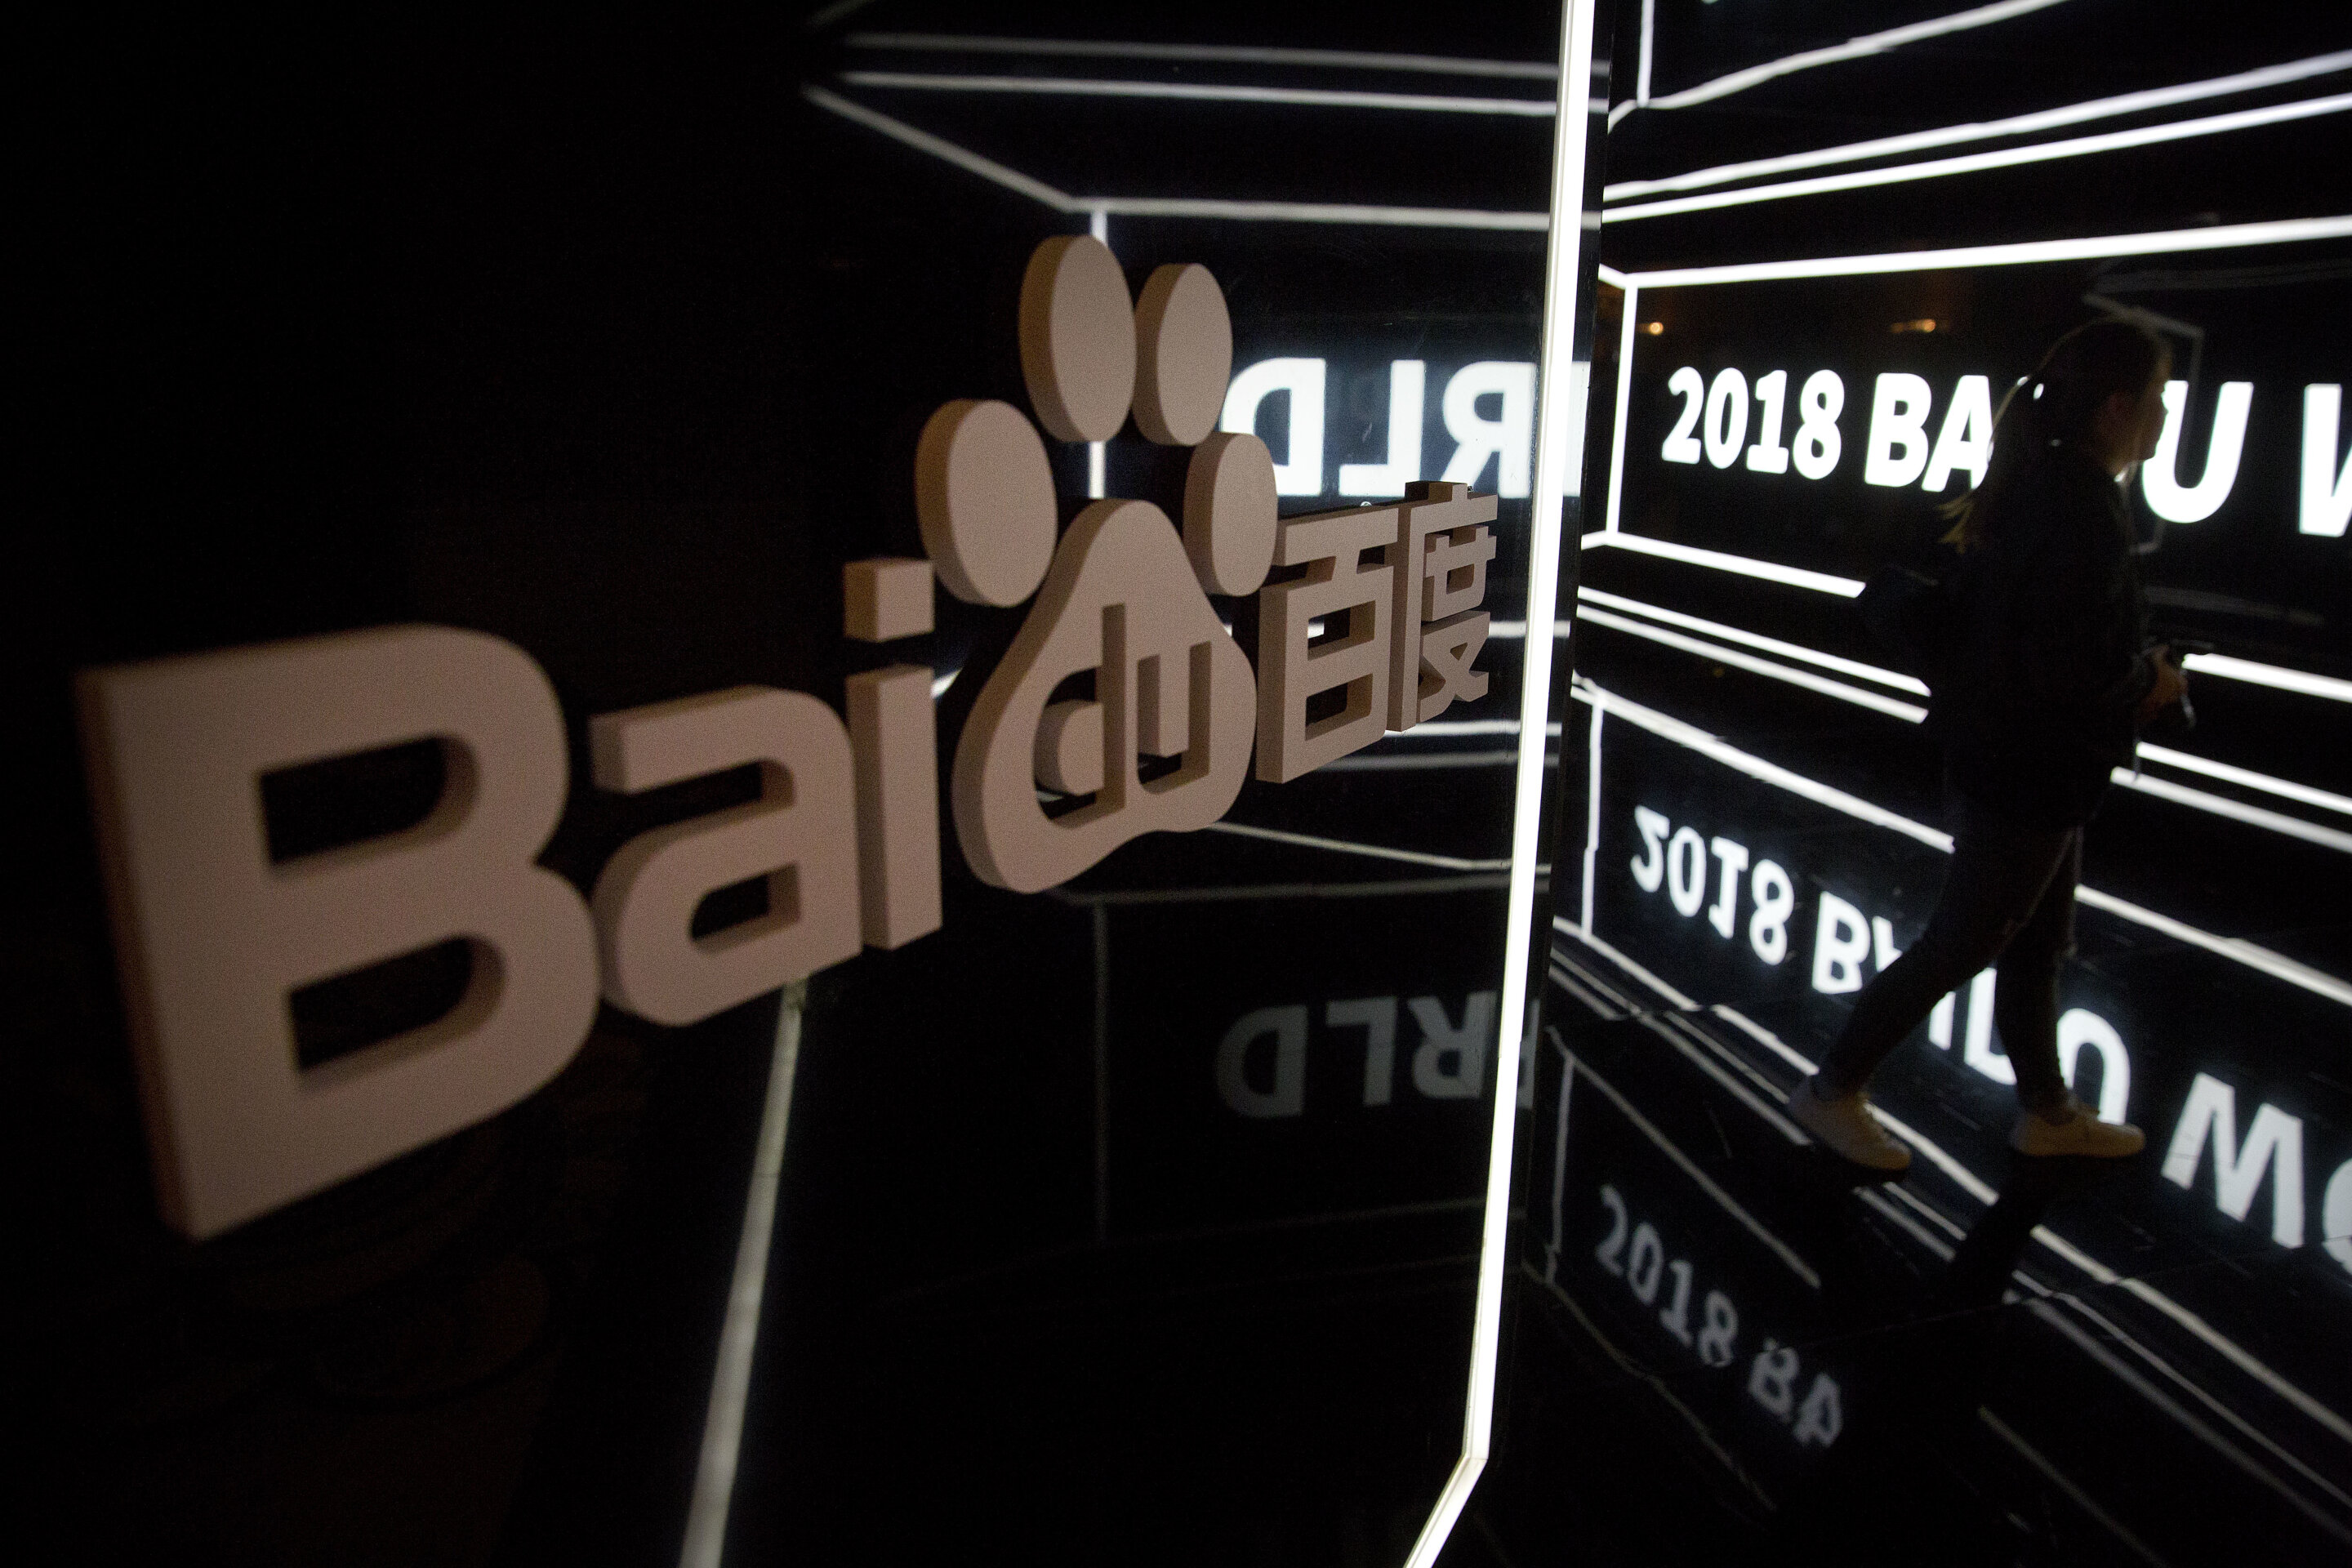 Baidu unveiled the Ernie 4.0 AI model and called it a competitor to GPT-4